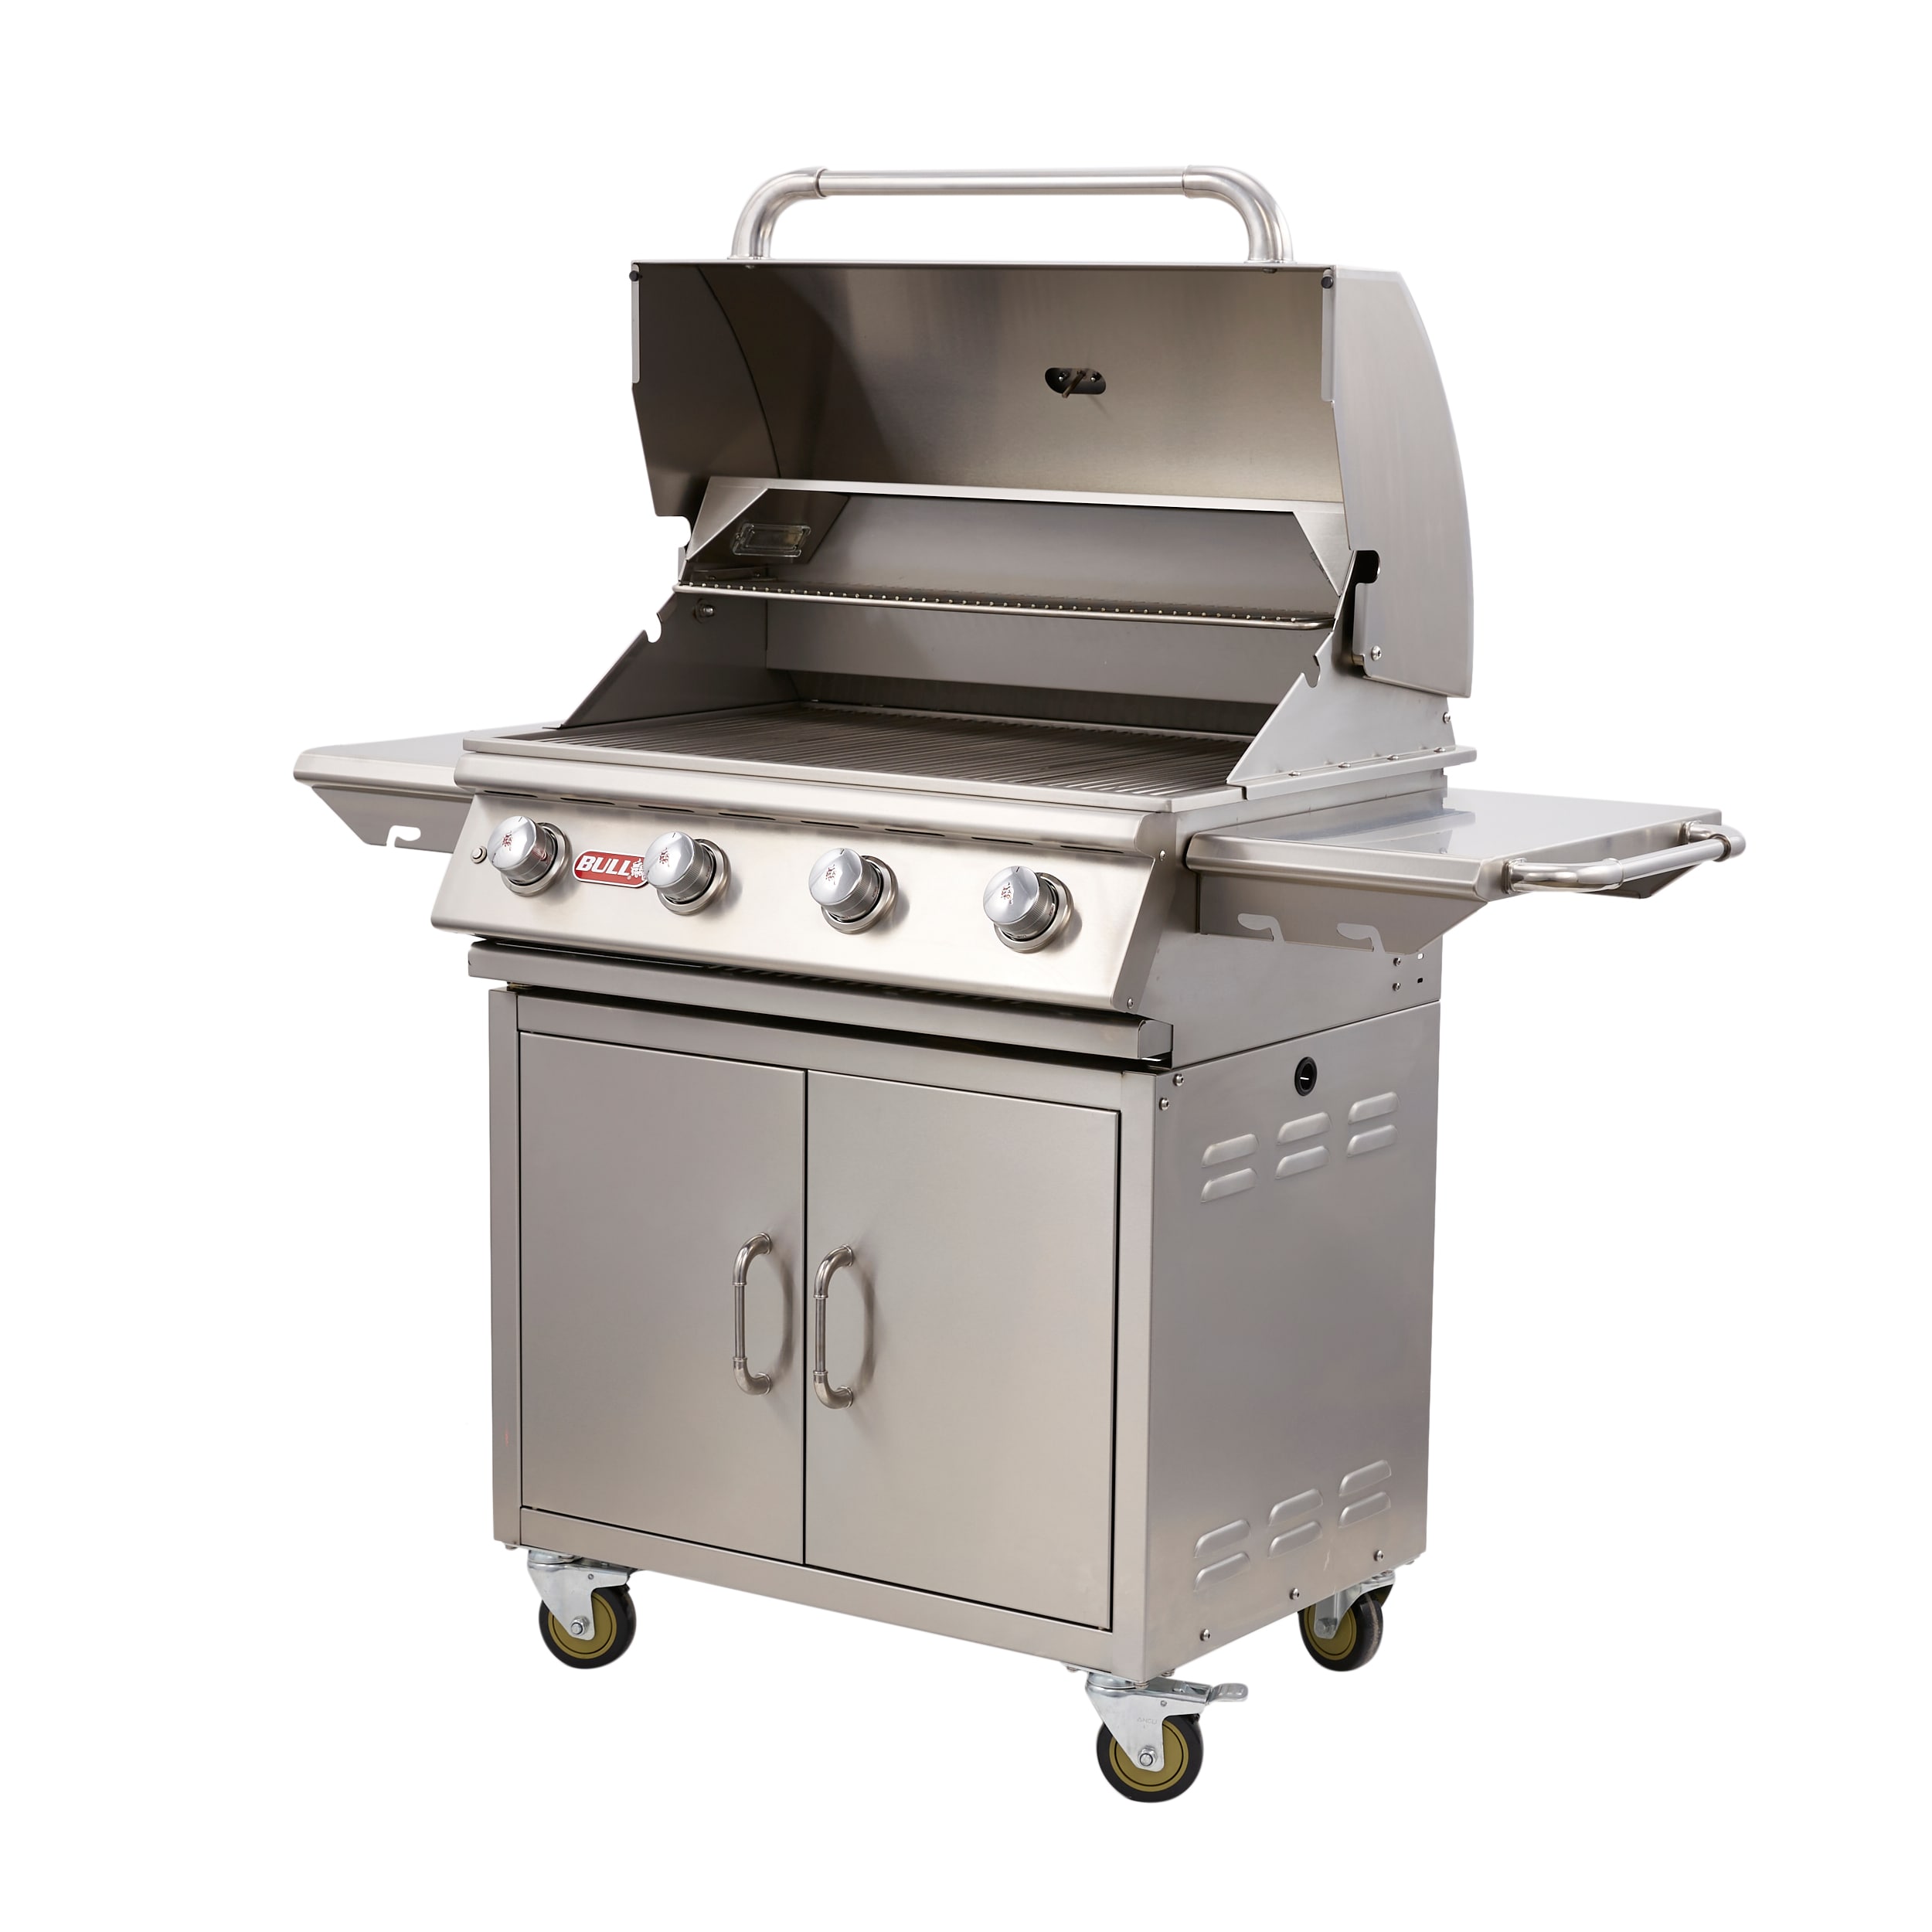 Bull 30-Inch Built-in Commercial Griddle, Natural GAS (92009)